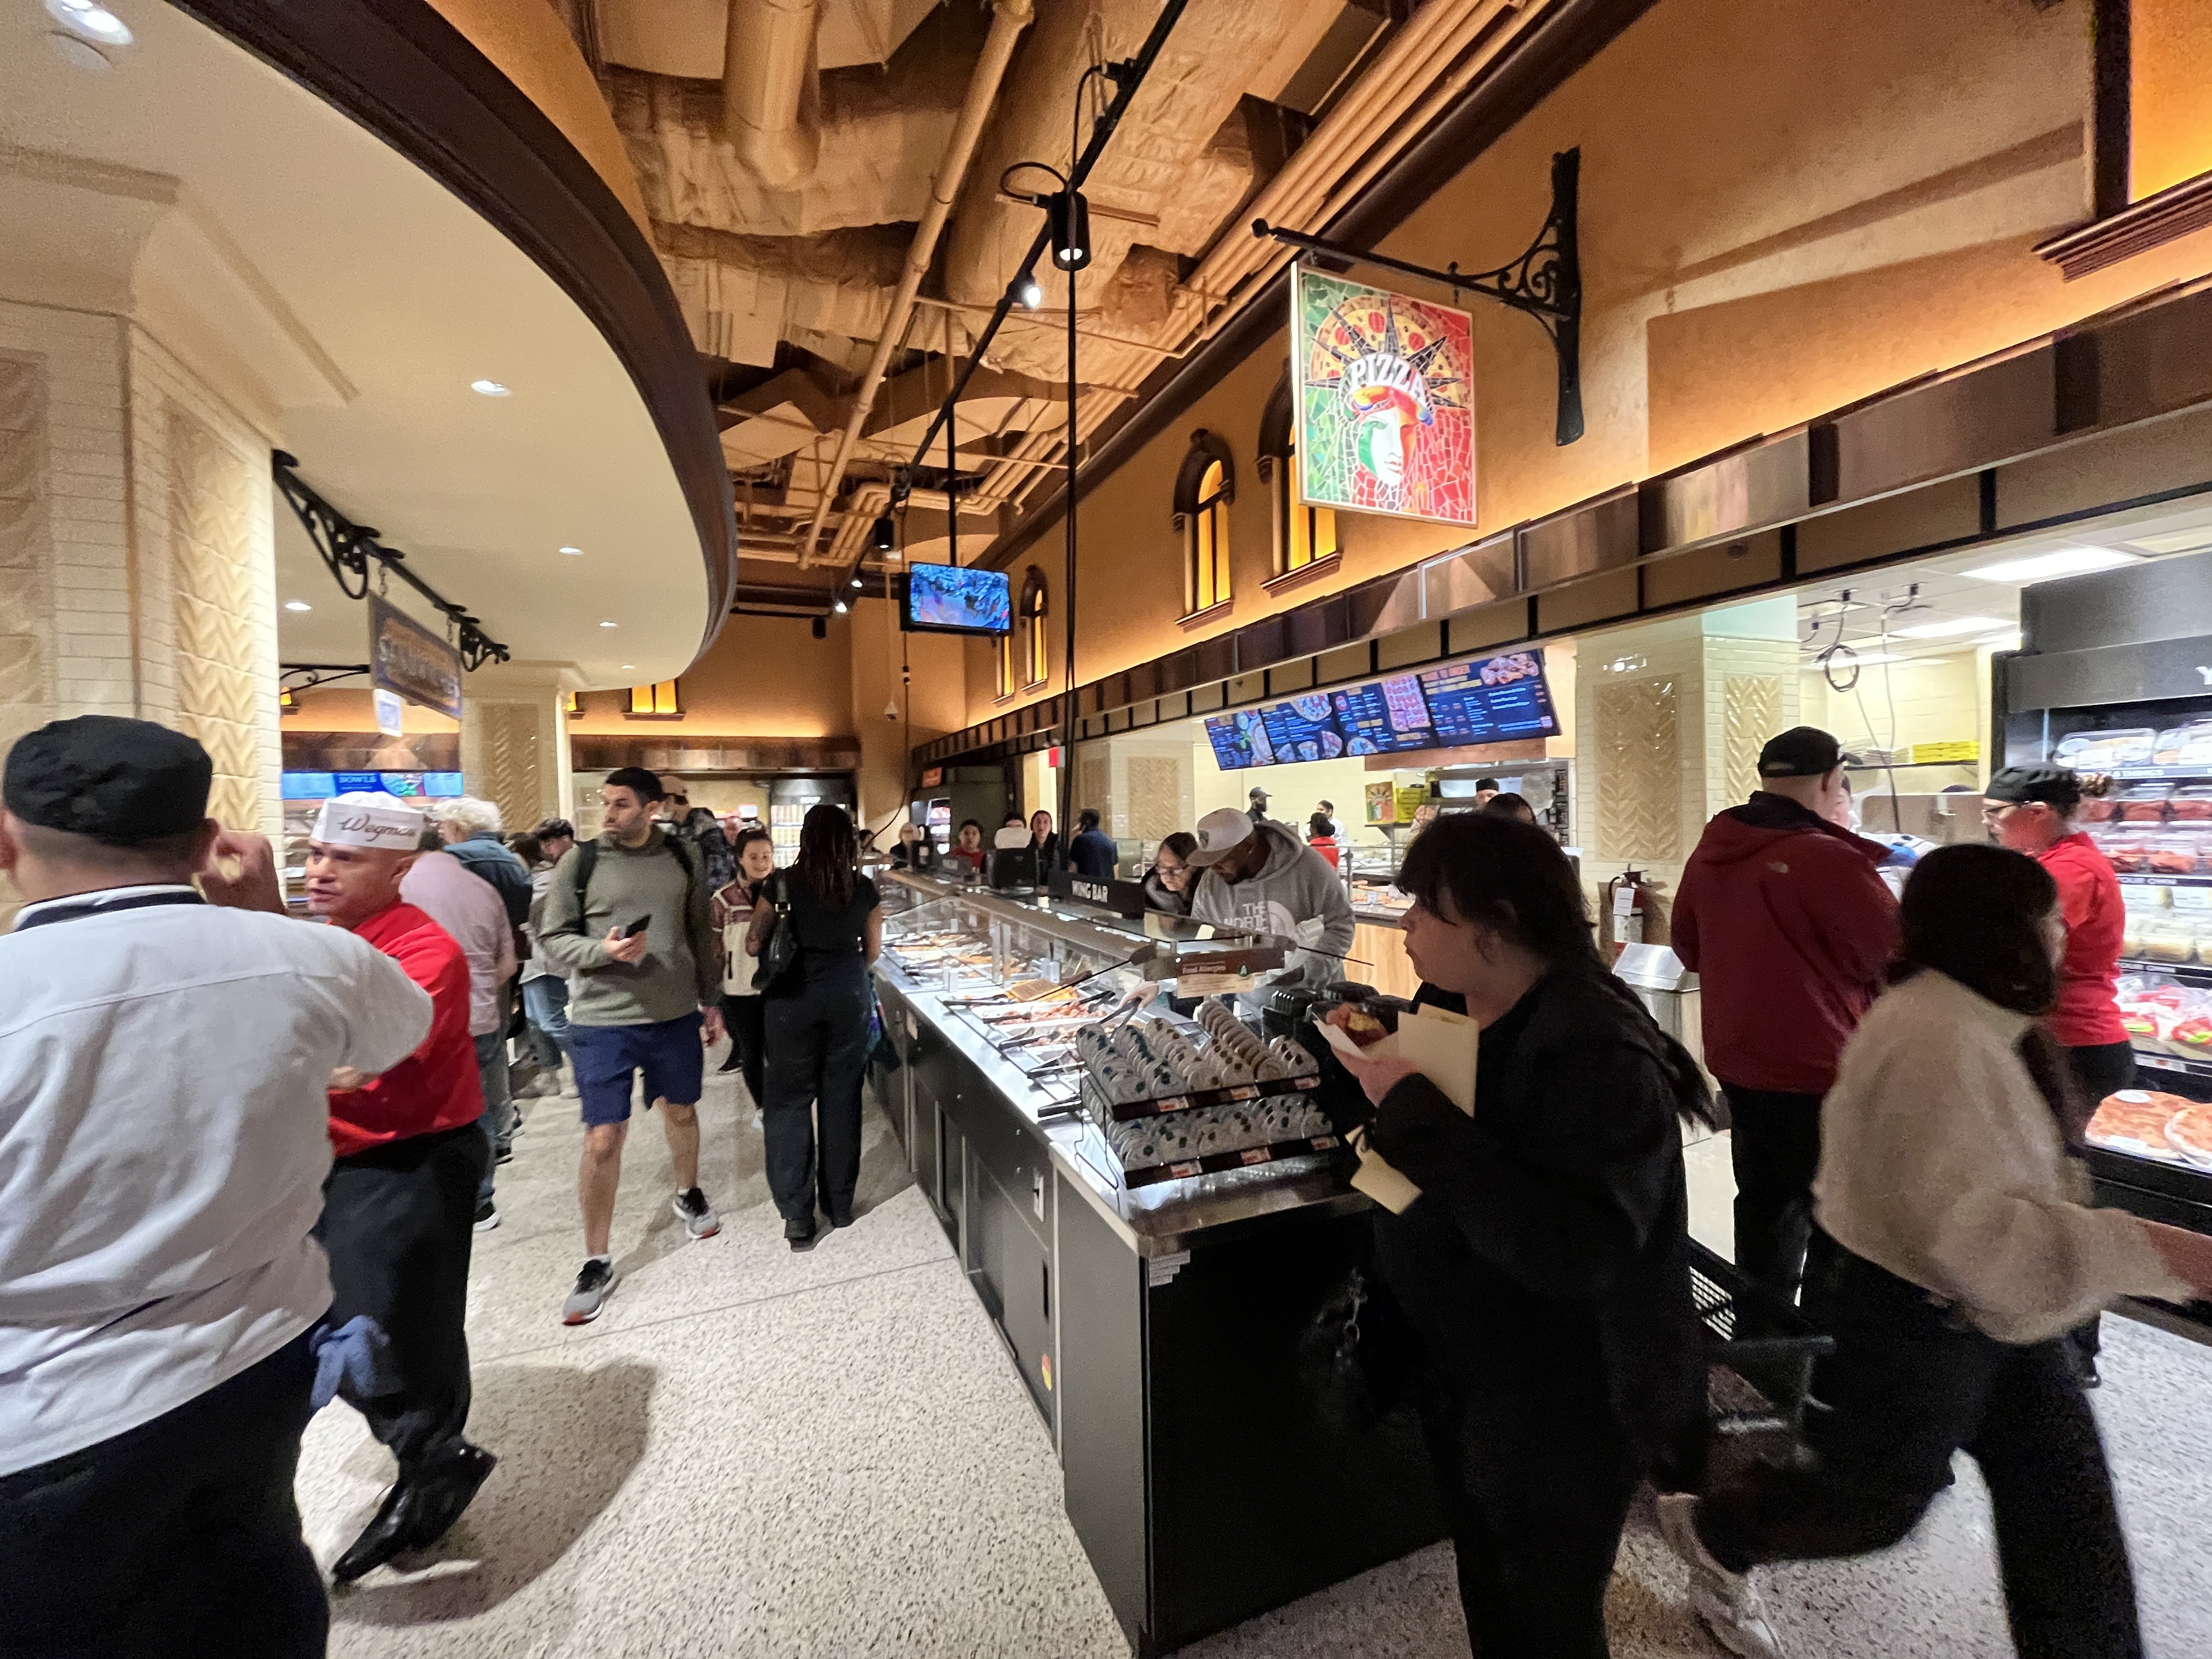 Wegmans brings back self-serve food bars at some stores; what